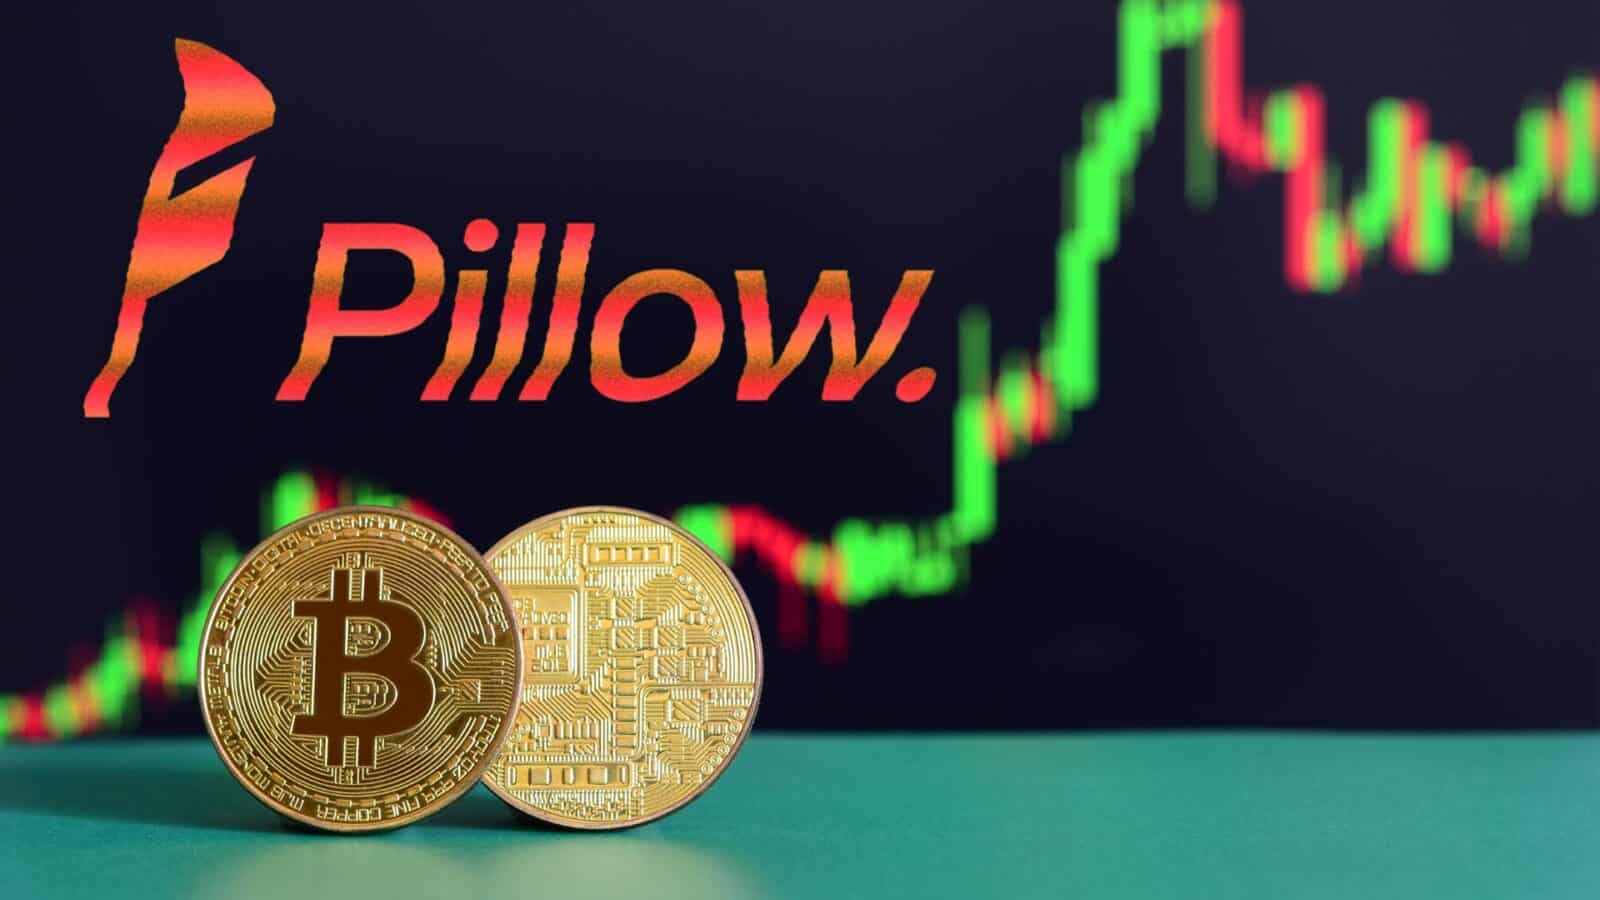 Pillow, a Singapore-based crypto investment startup, has raised M in a series A funding round led by Accel, Quona, and Jump Capital.